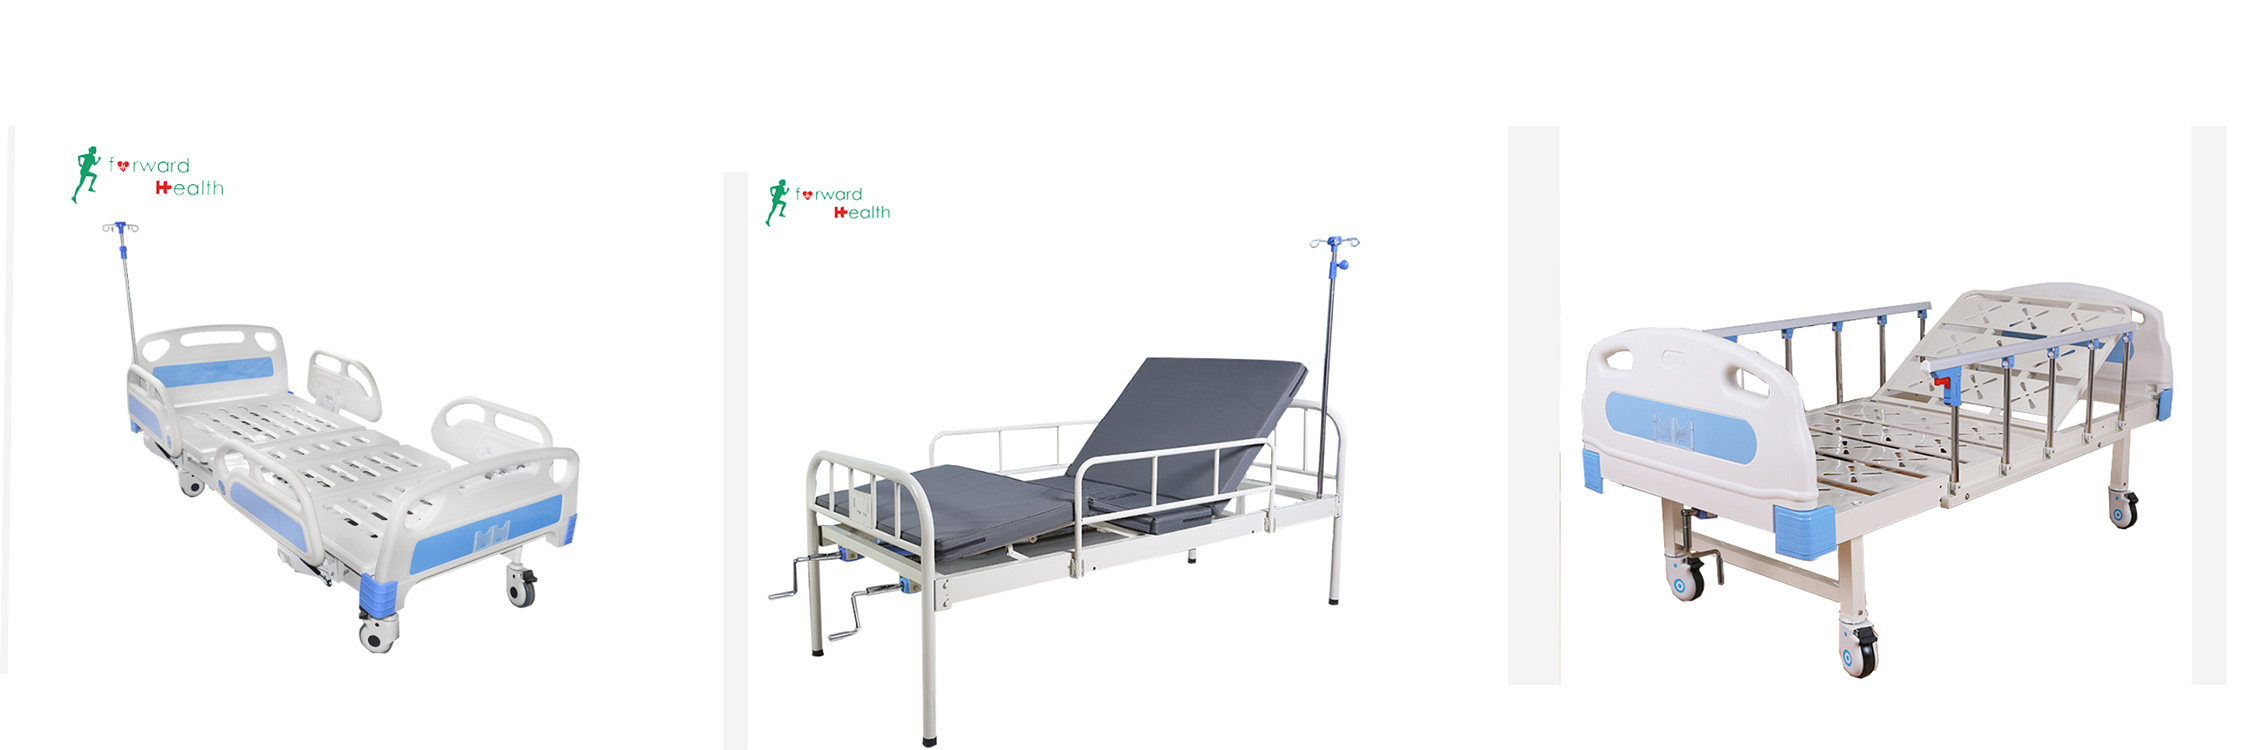 5 hot-selling medical beds recommended